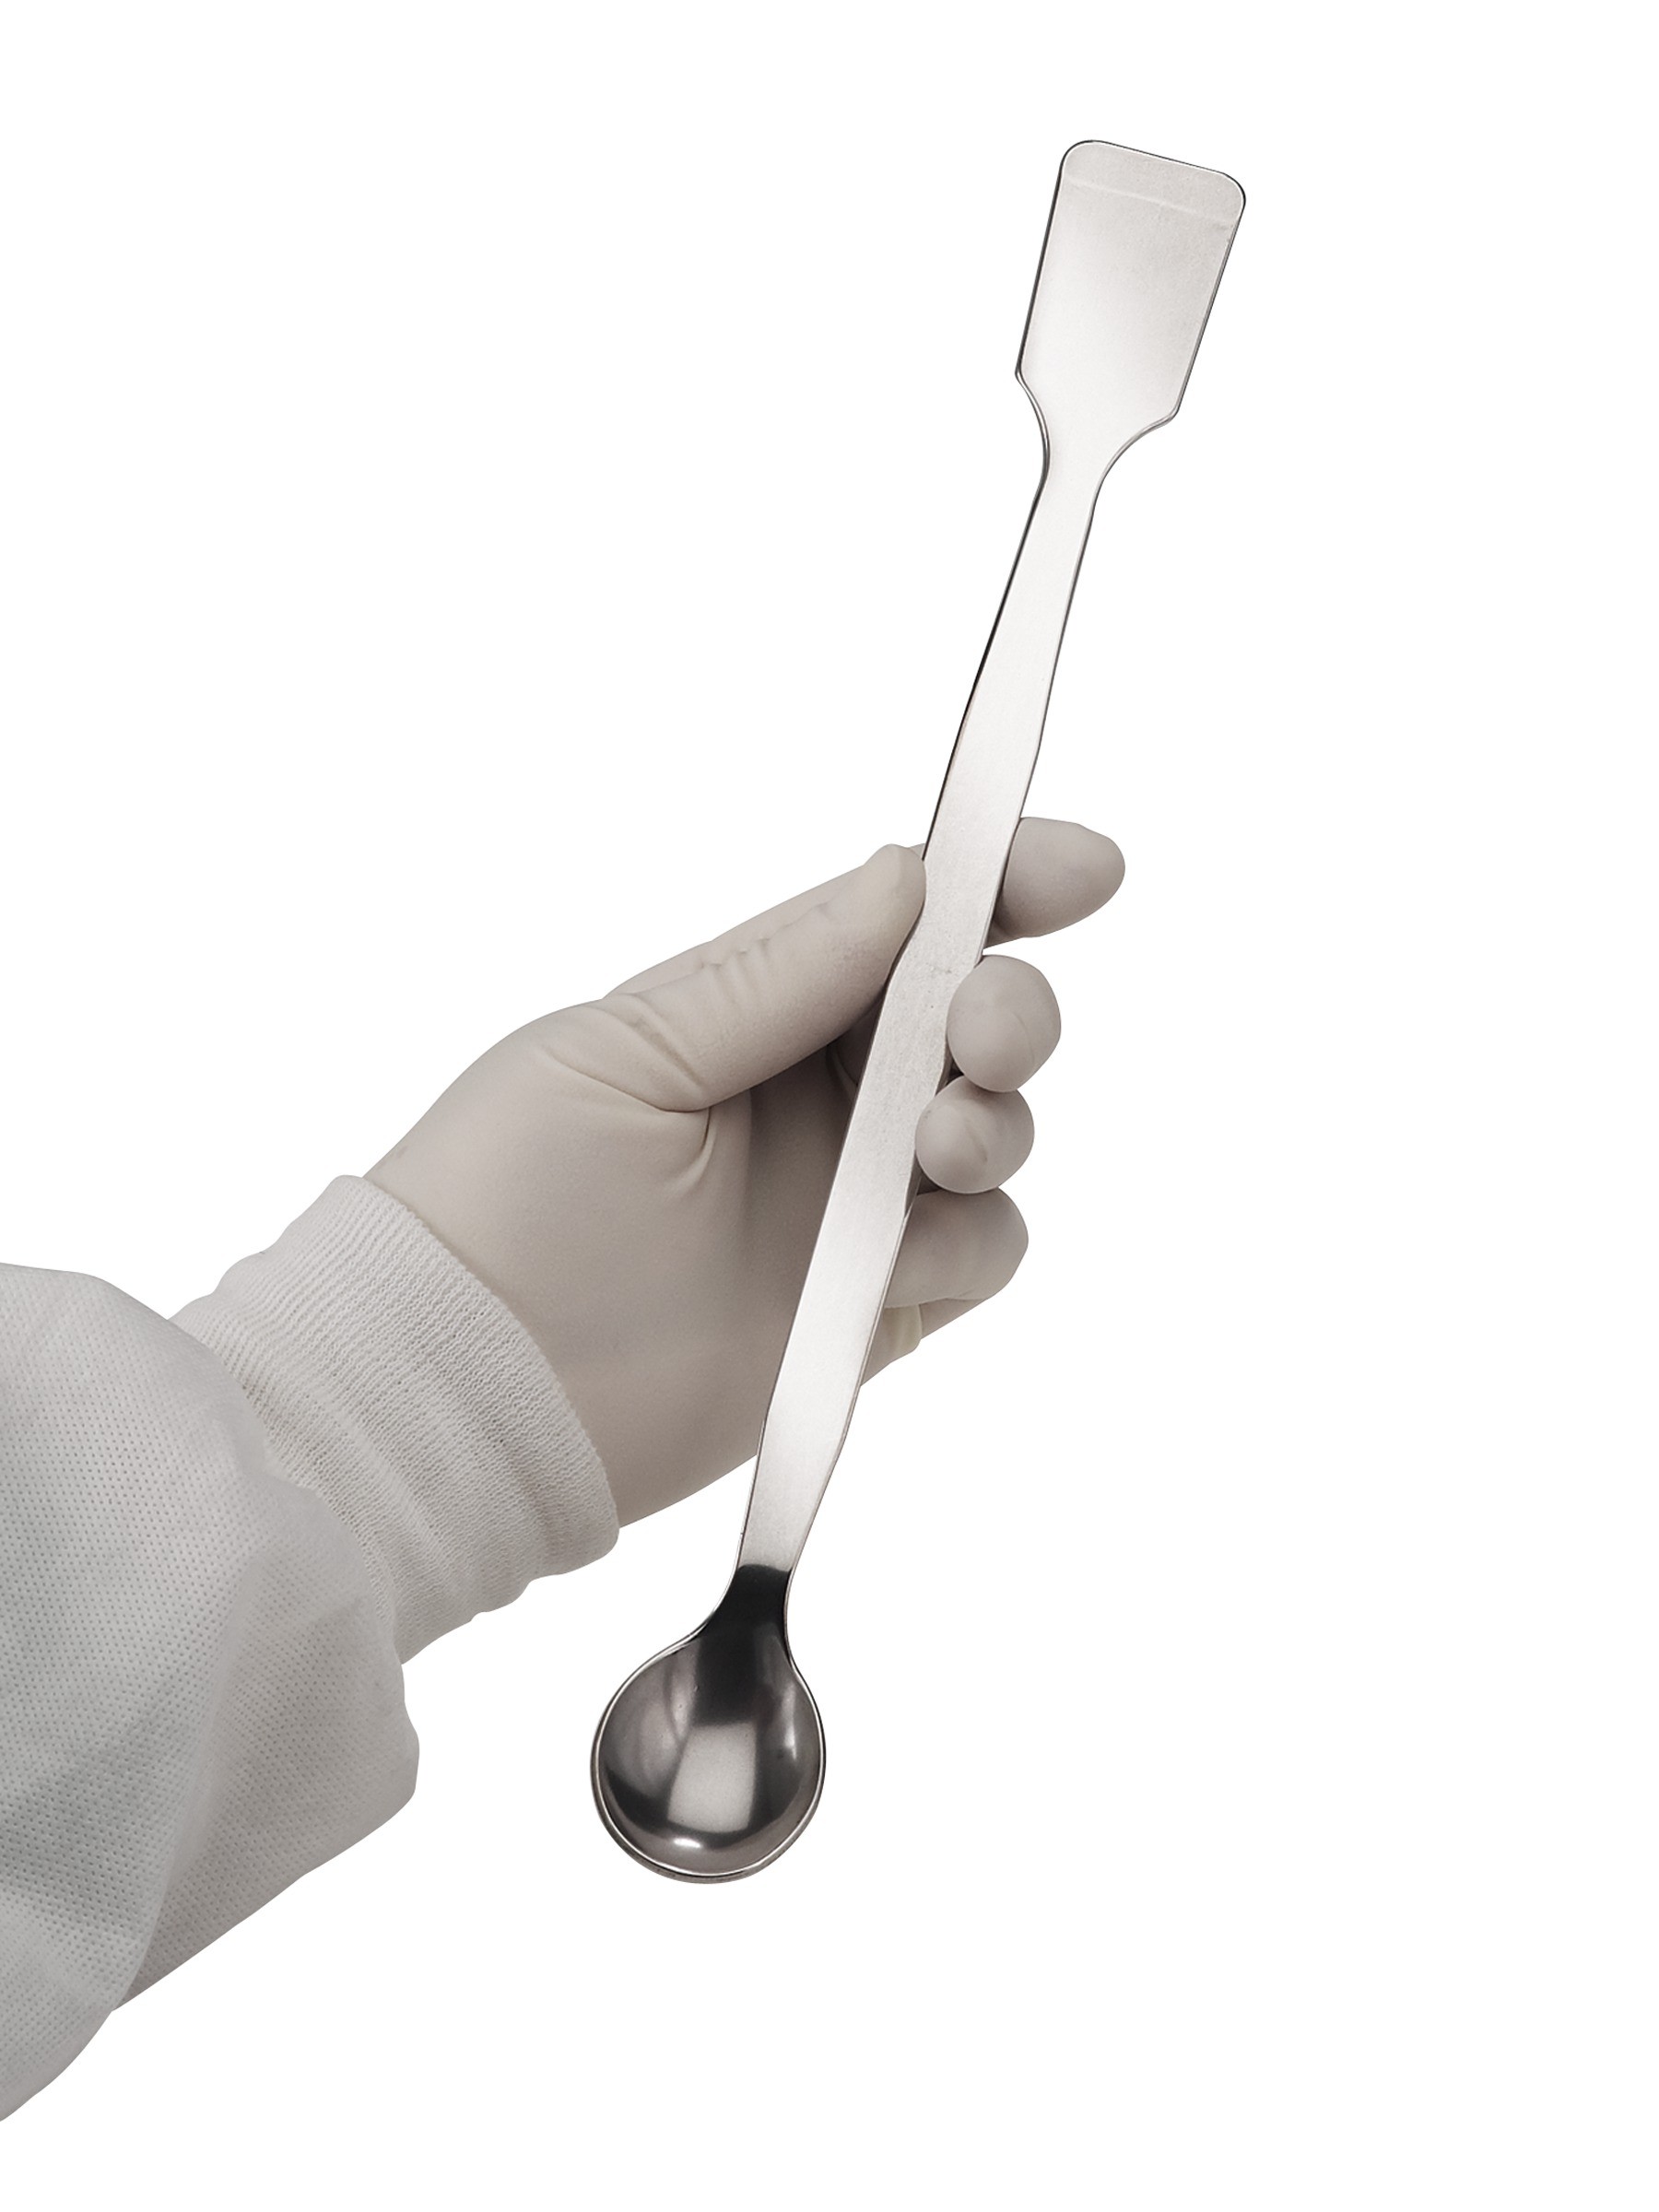 Stainless Steel Lab Spoon and Spatula